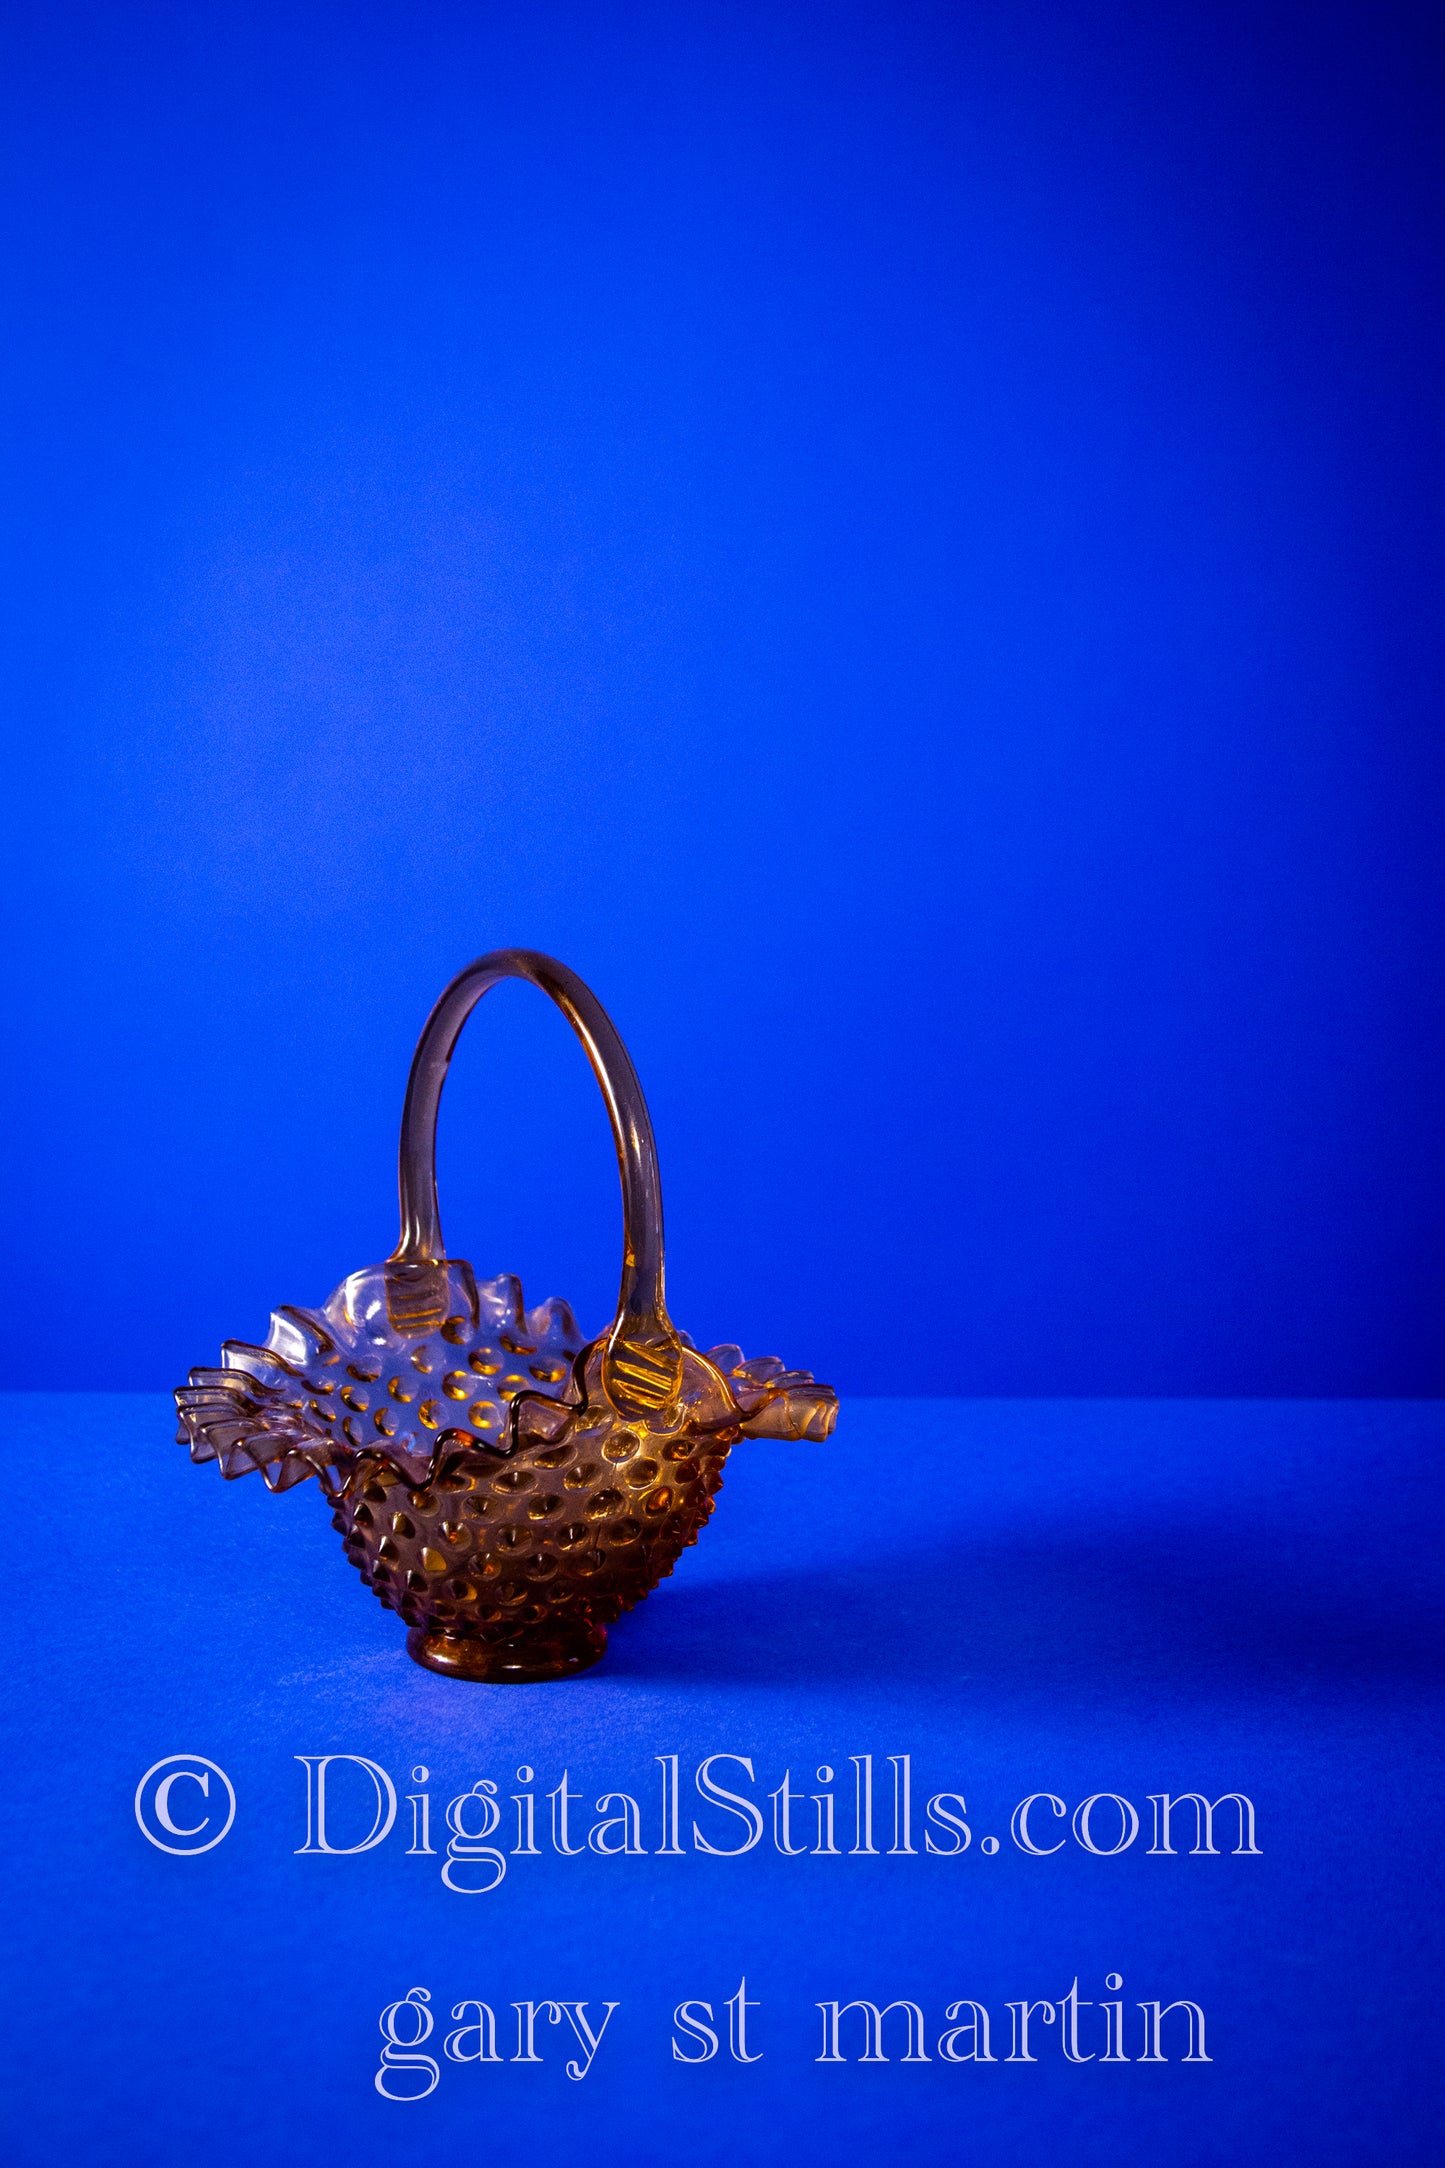 Basket In The Blue